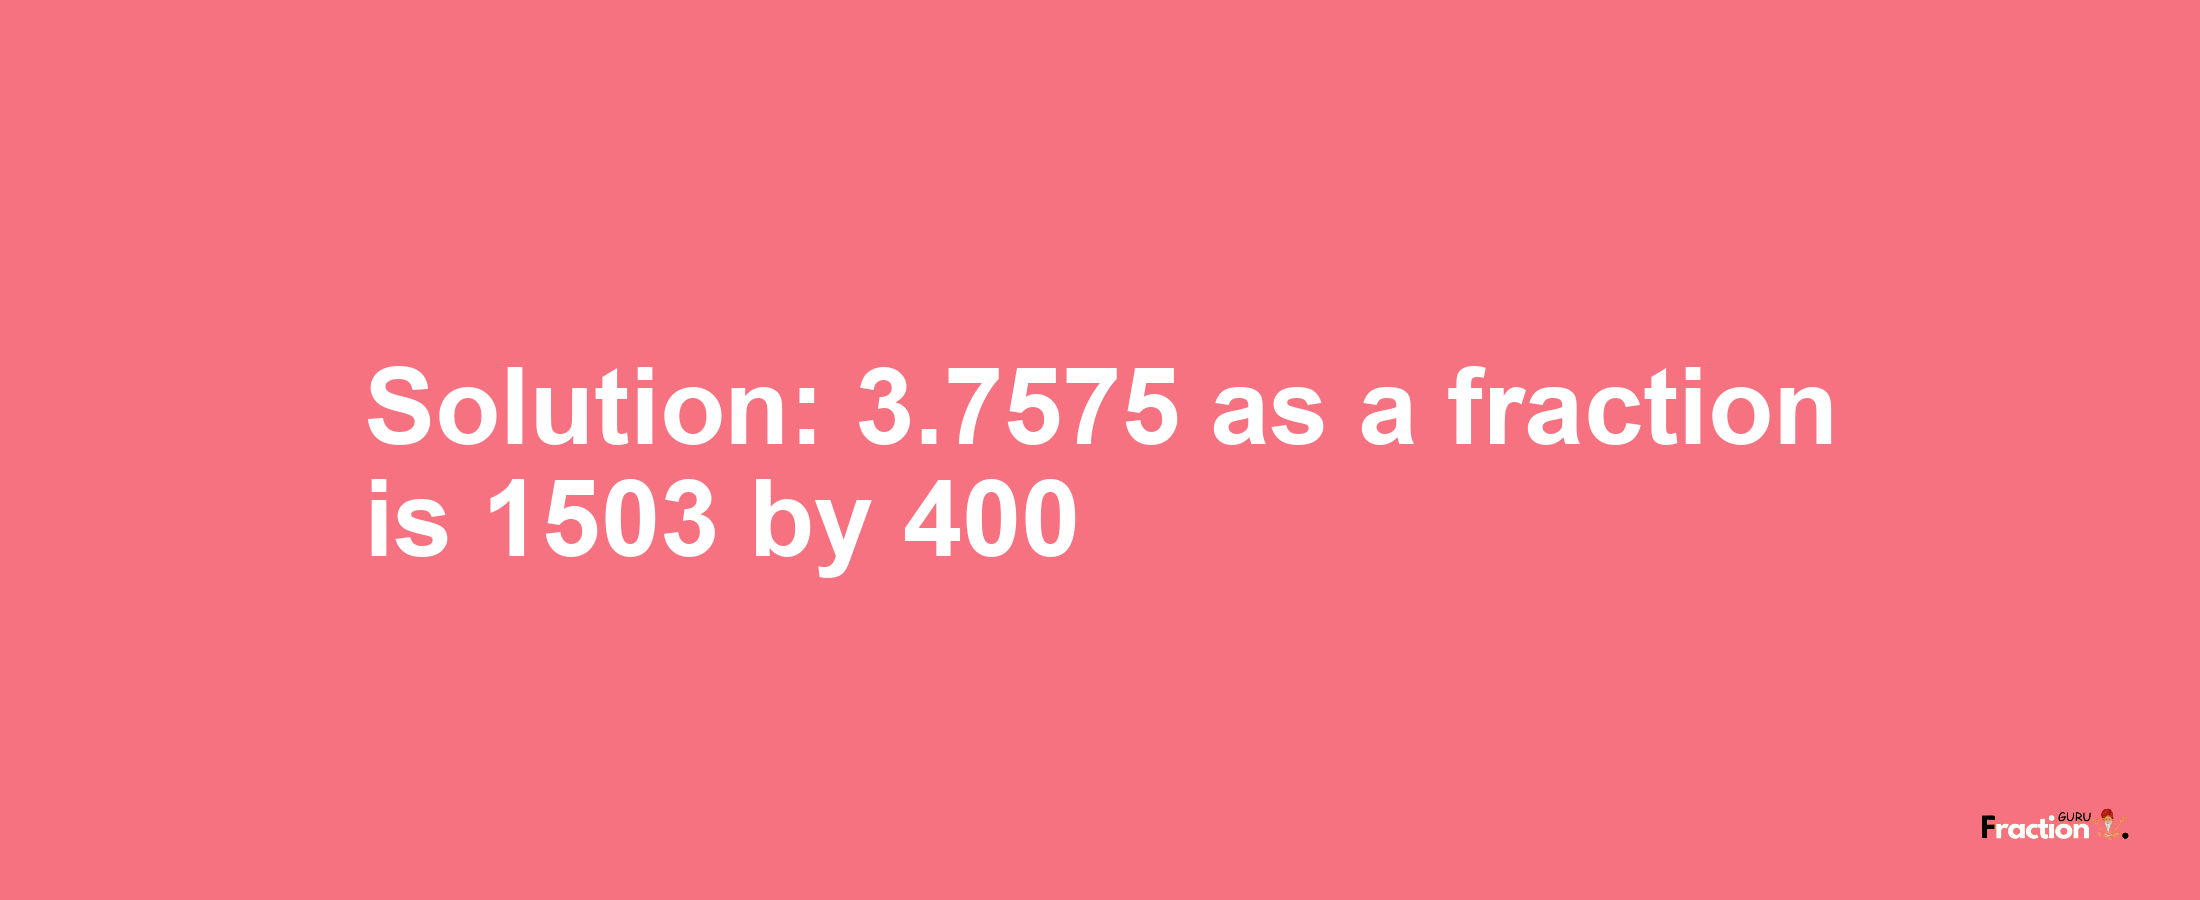 Solution:3.7575 as a fraction is 1503/400